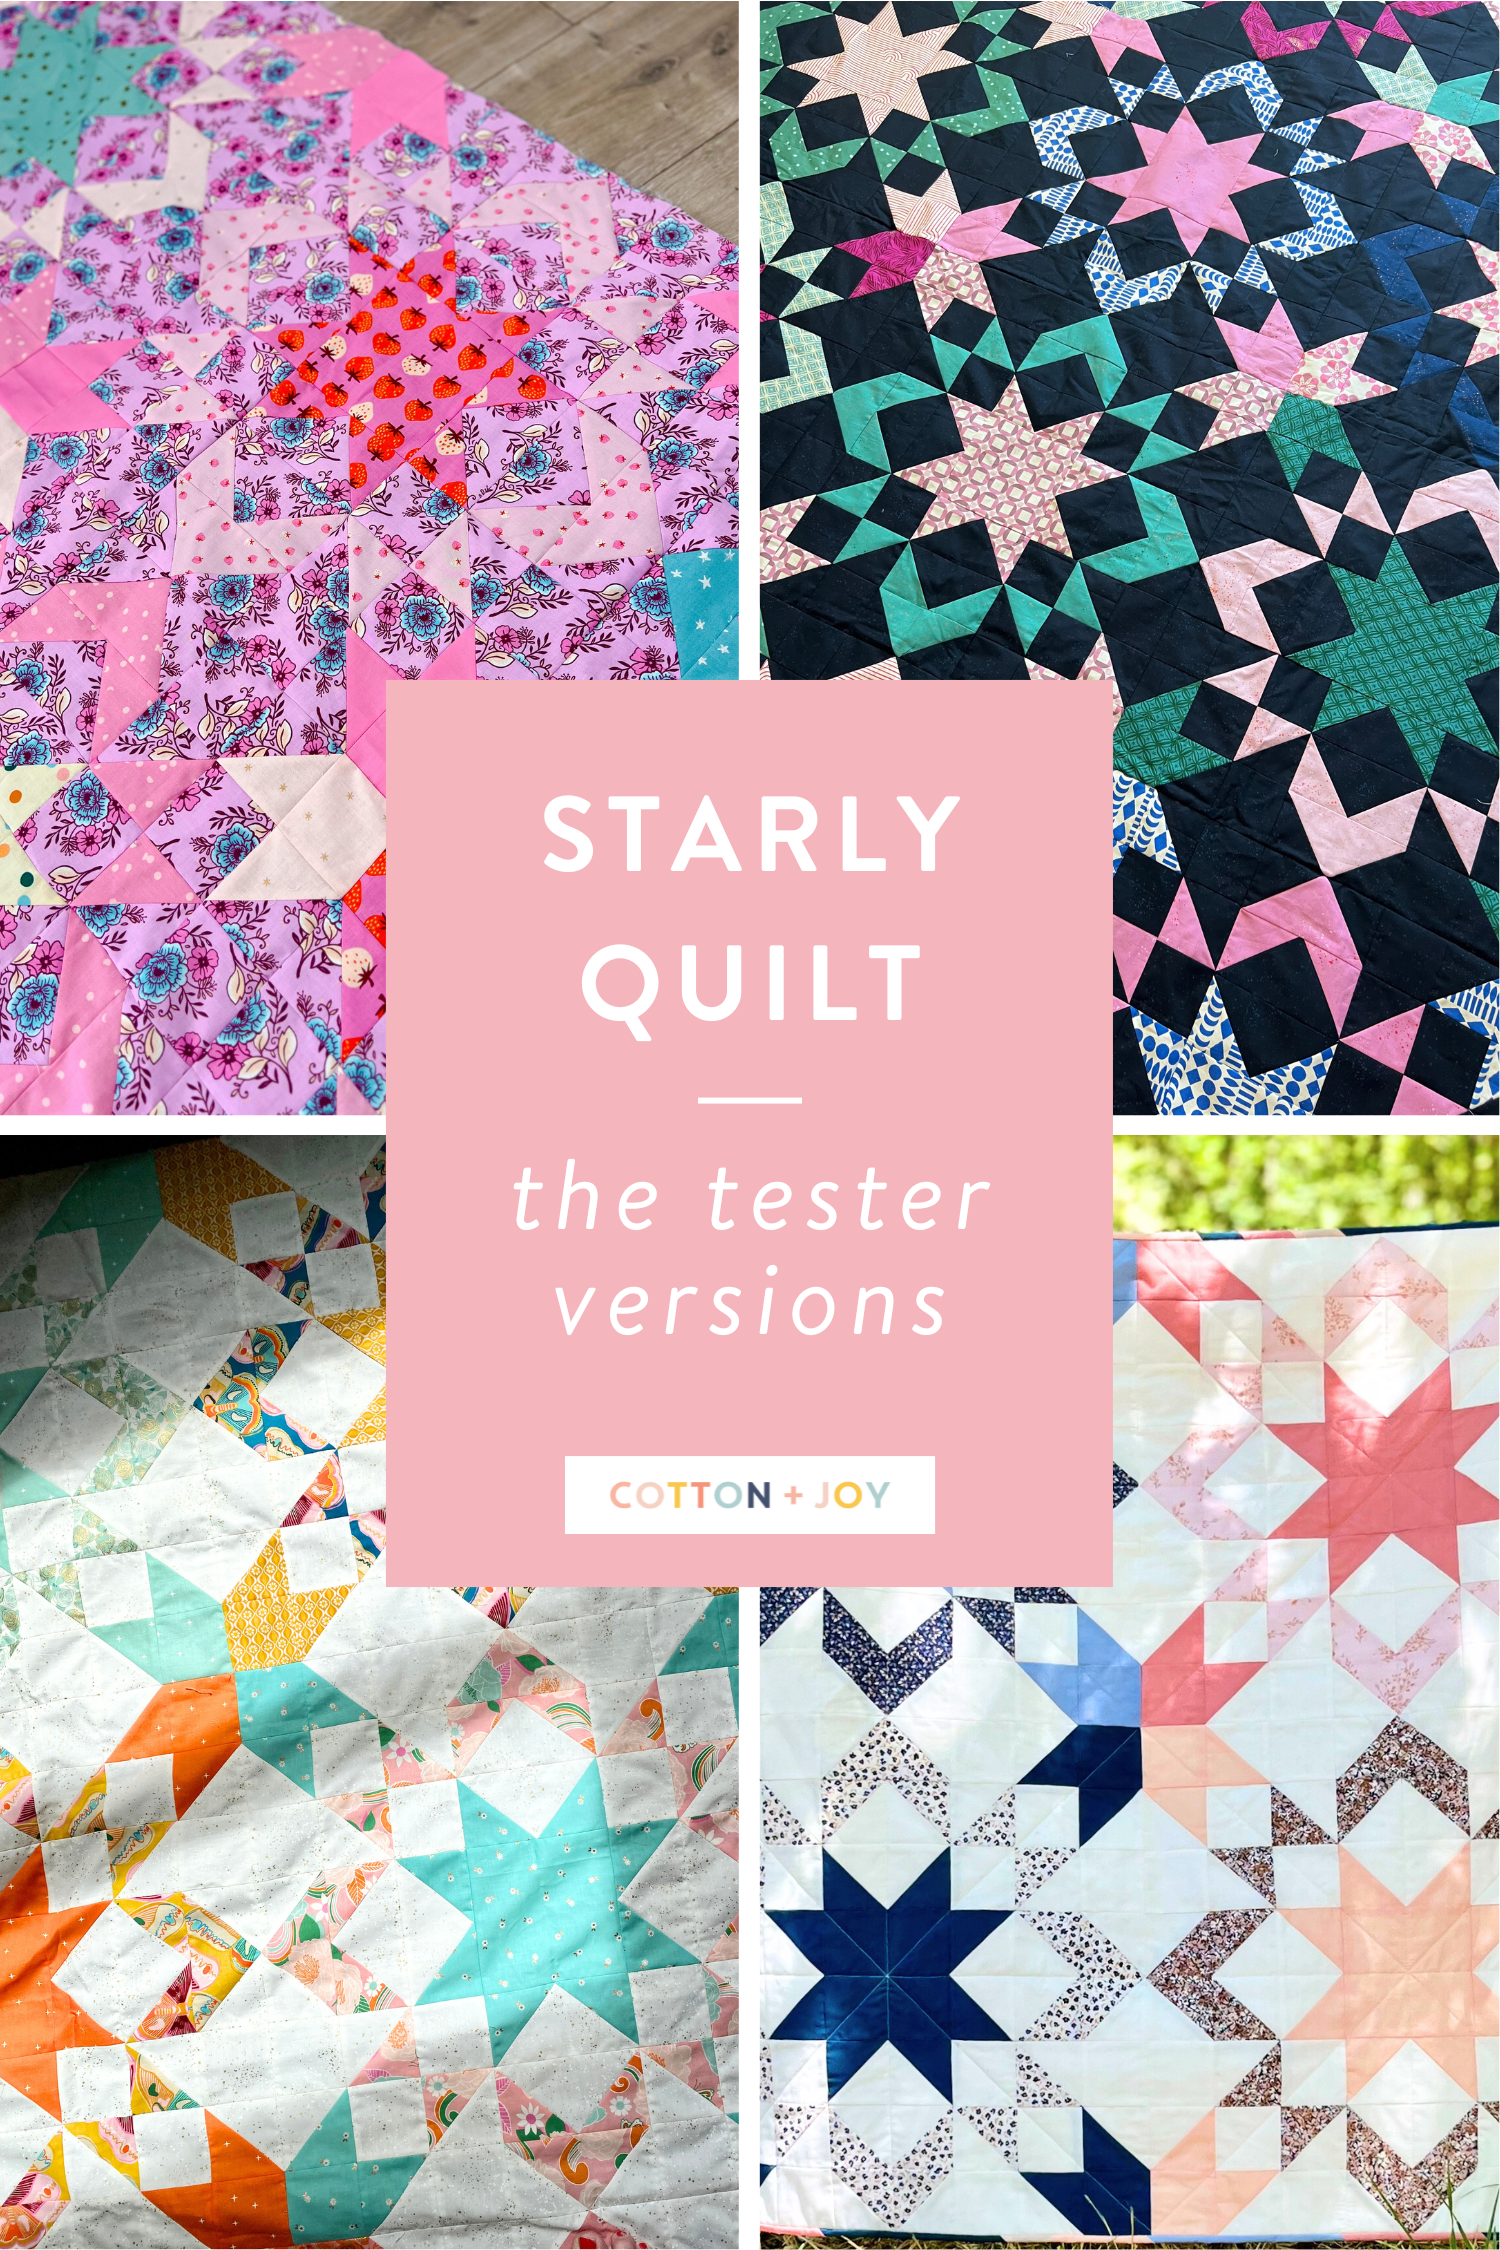 Starly Quilt made by quilt pattern testers. A modern but classic sawtooth star block quilt pattern by Cotton and Joy.